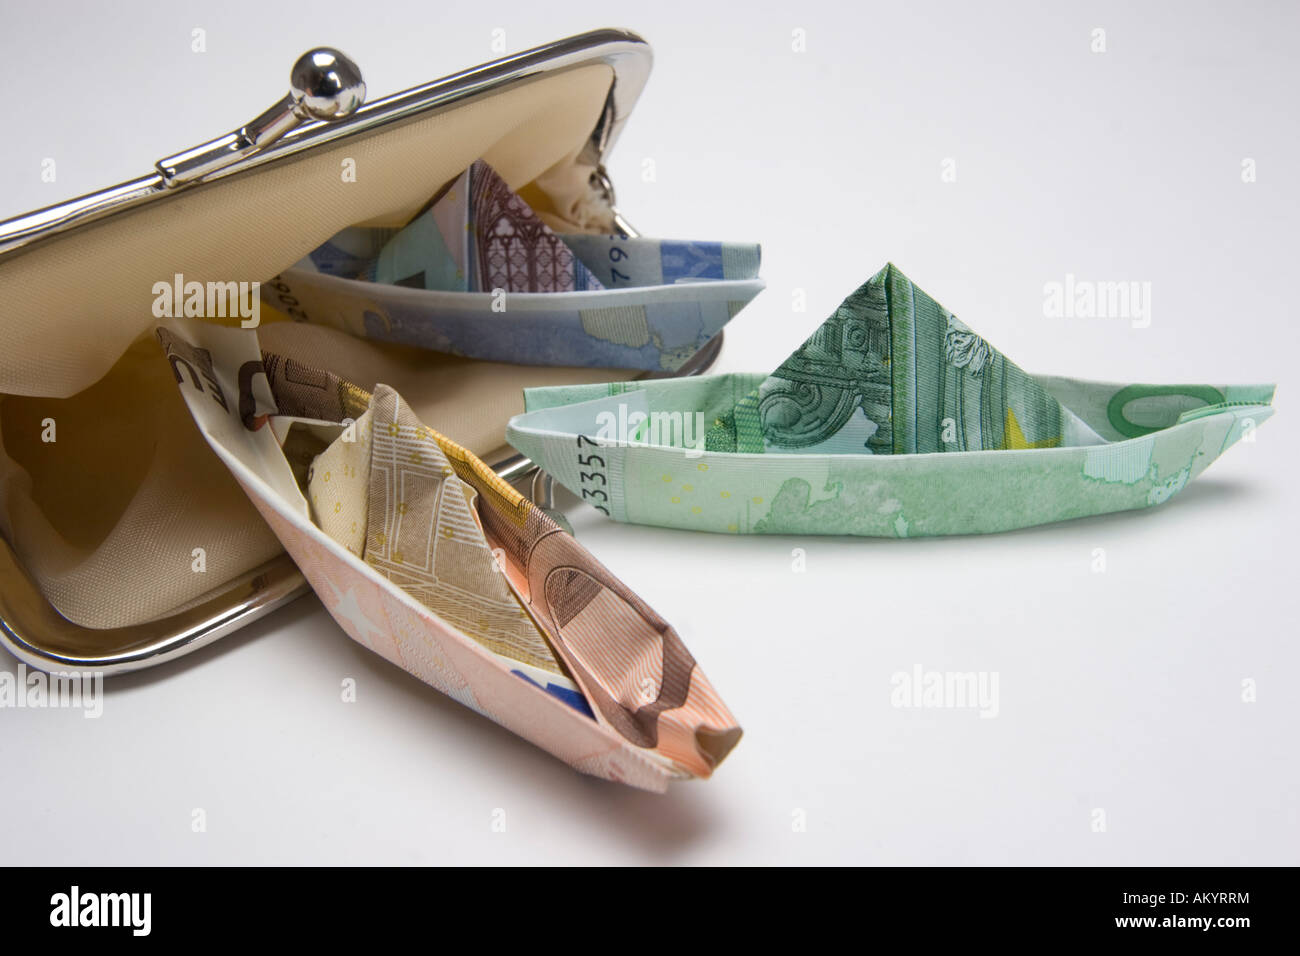 Small ships made of banknotes in a purse Stock Photo